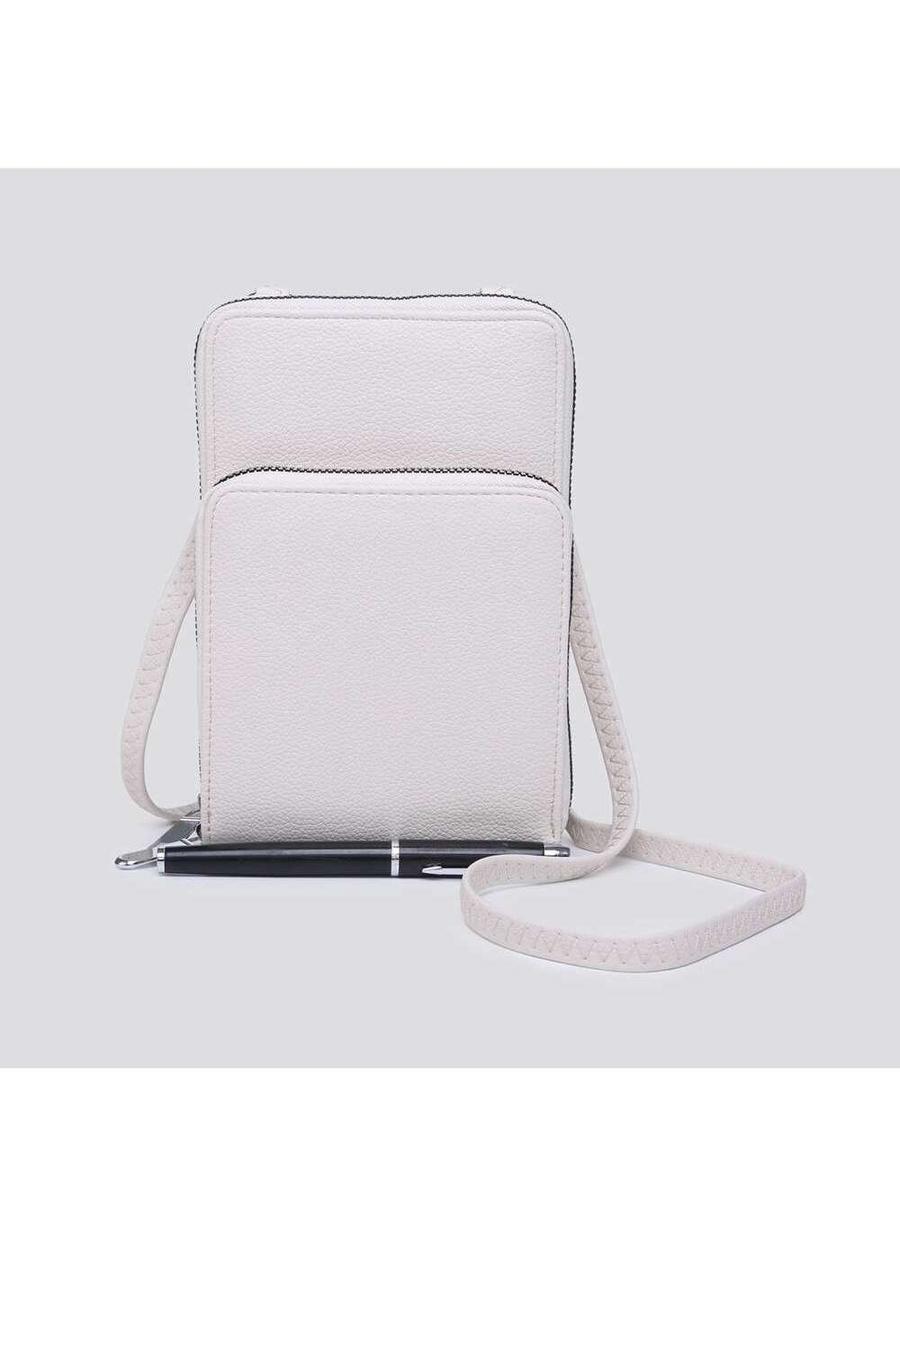 Beige Small Double-Zipped Mobile Phone Bag with Adjustable Strap